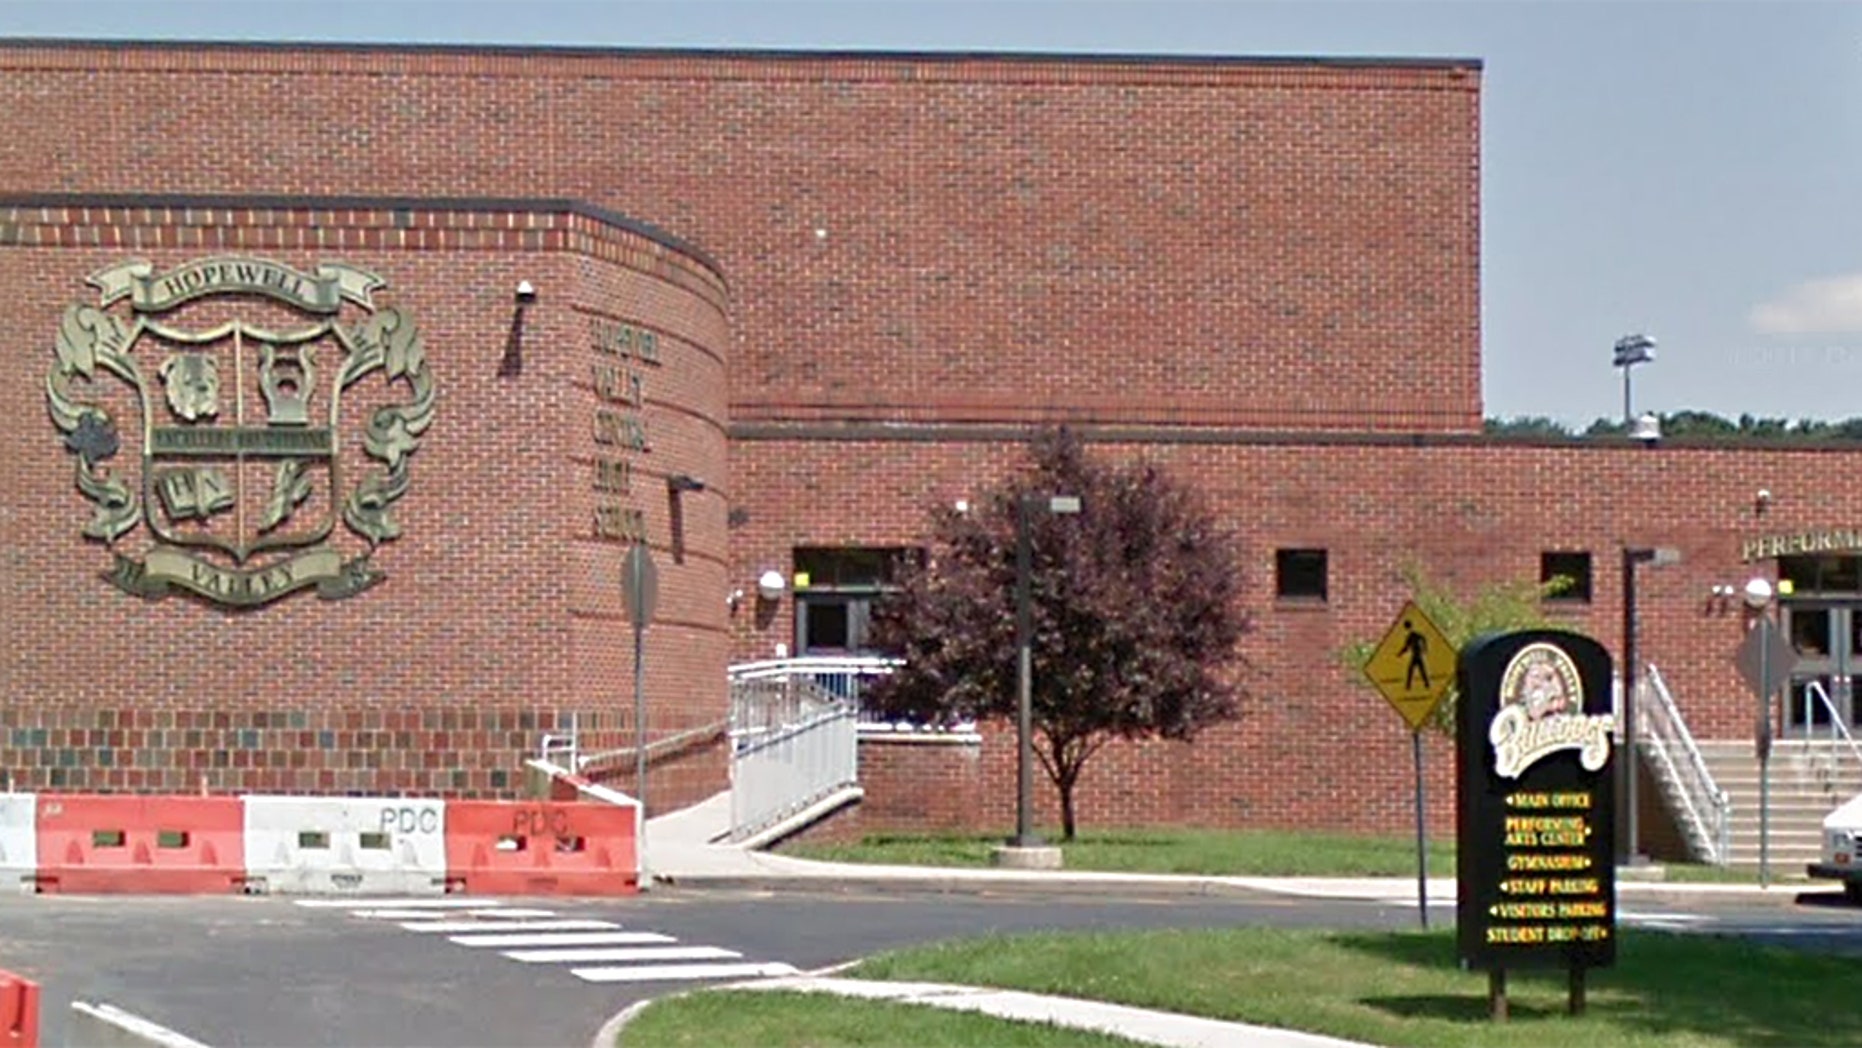 Parents of students at Hopewell Valley High School reportedly chanted racial provocations against Hispanic players at Trenton Central High School, according to a report.